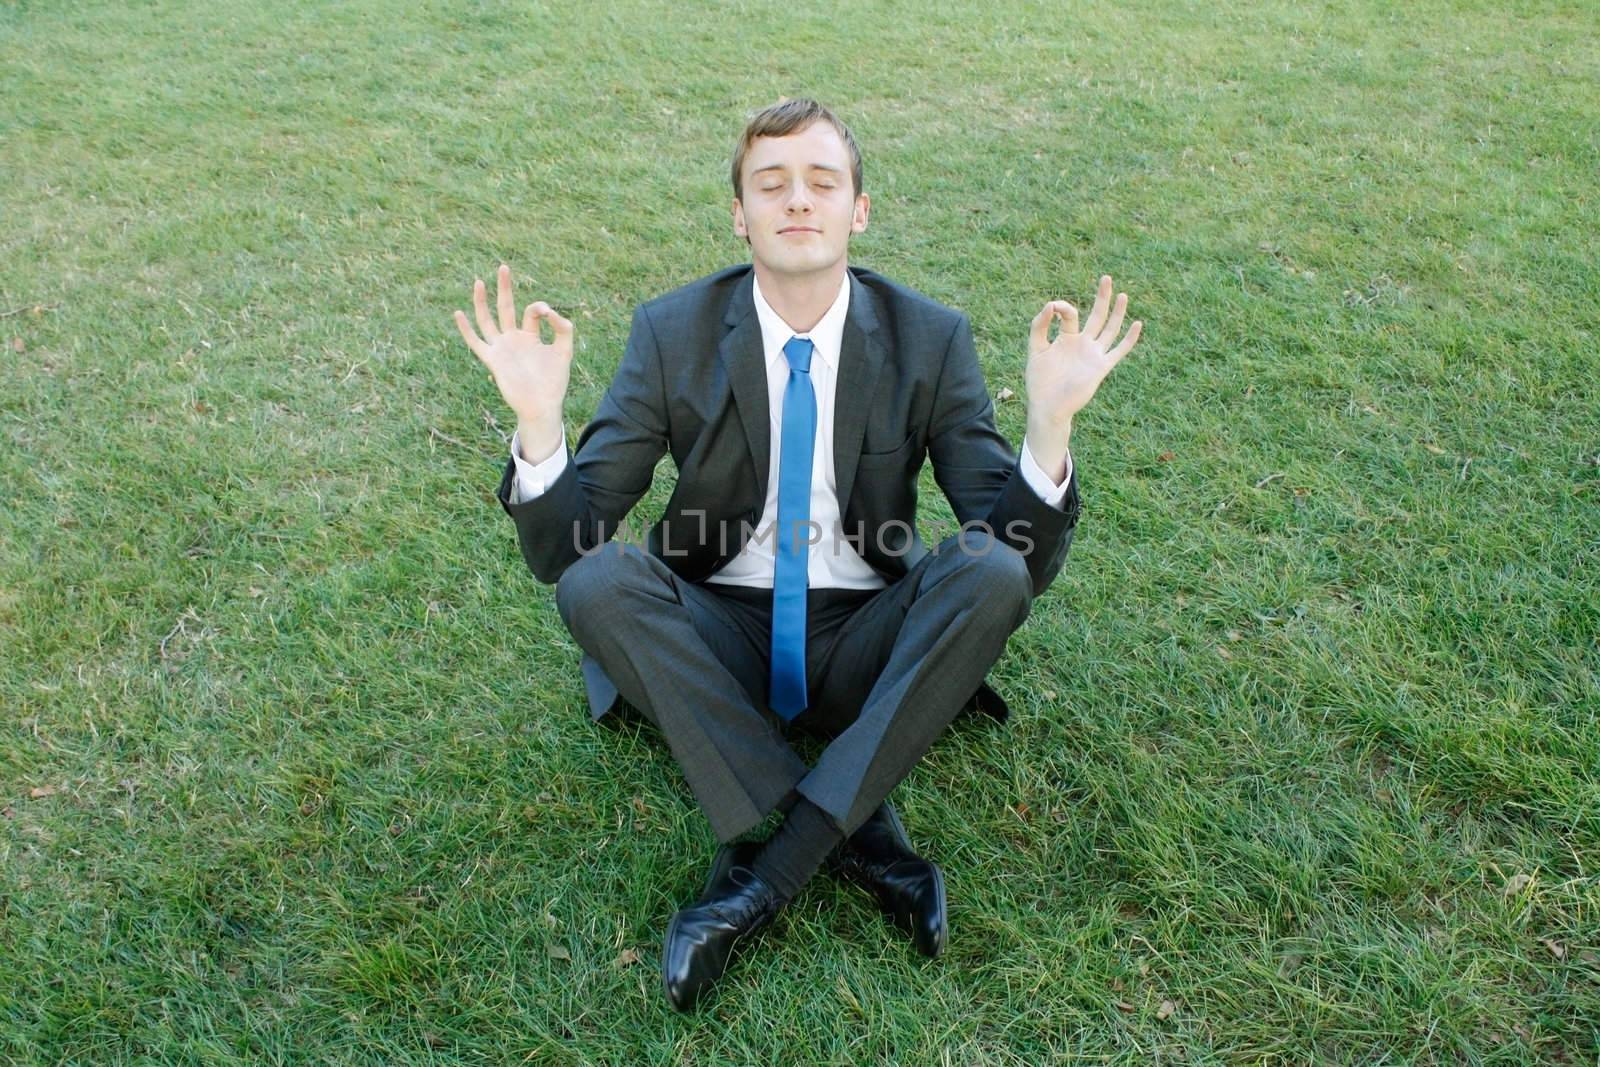 A business man doing yoga in the park